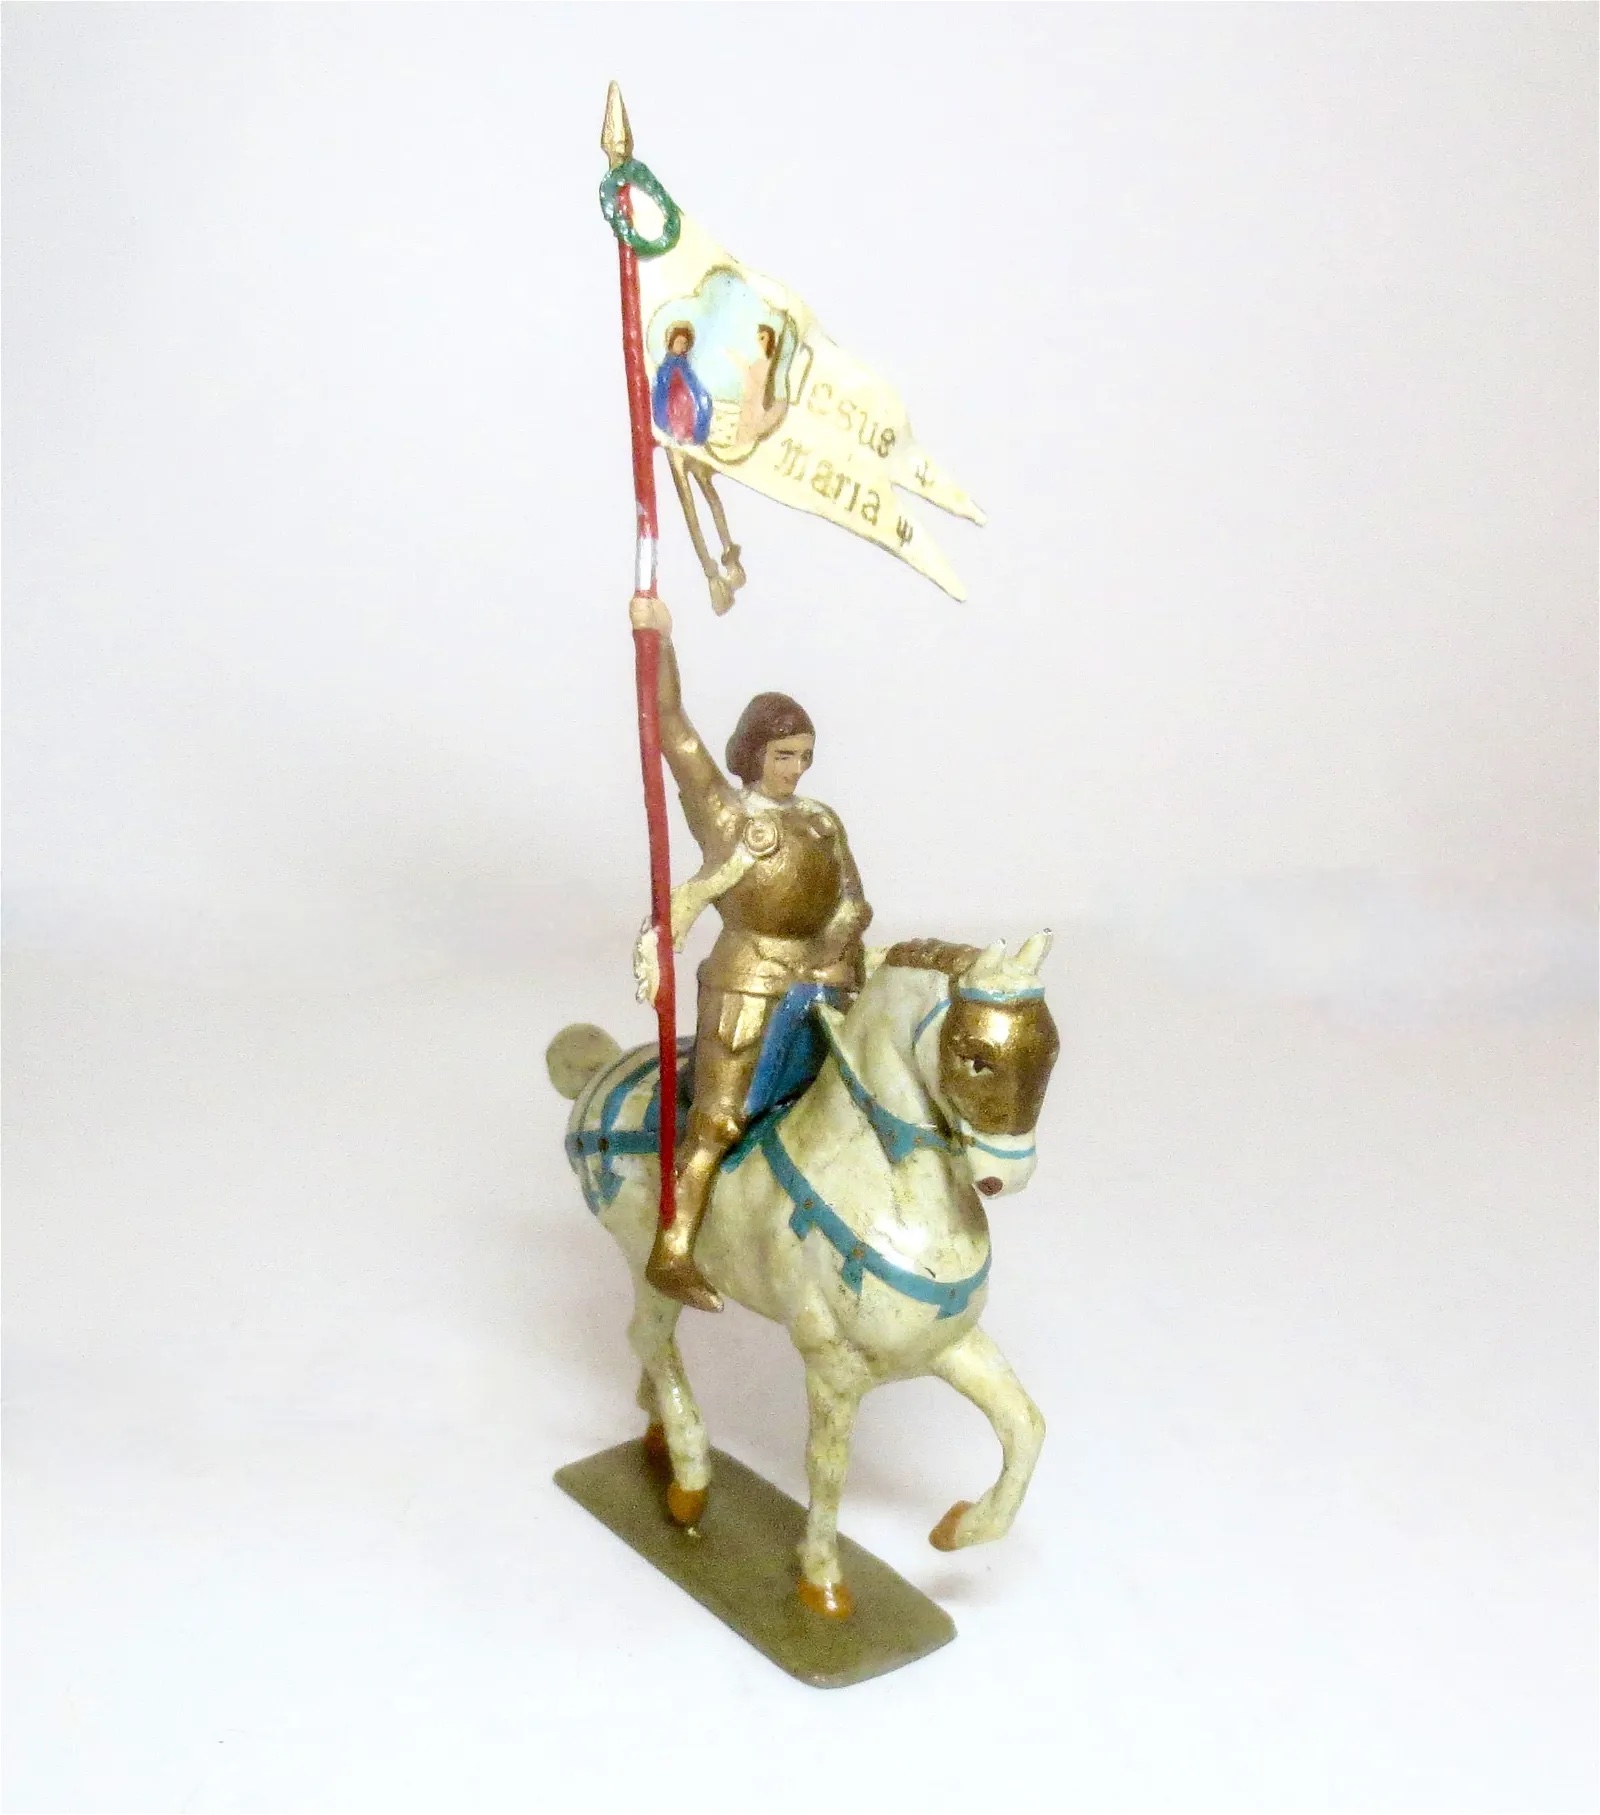 Gustave Vertunni Jeanne d'Arc figure mounted on a horse, which hammered for $800 and sold for $1,024 with buyer’s premium at Old Toy Soldier Auctions.